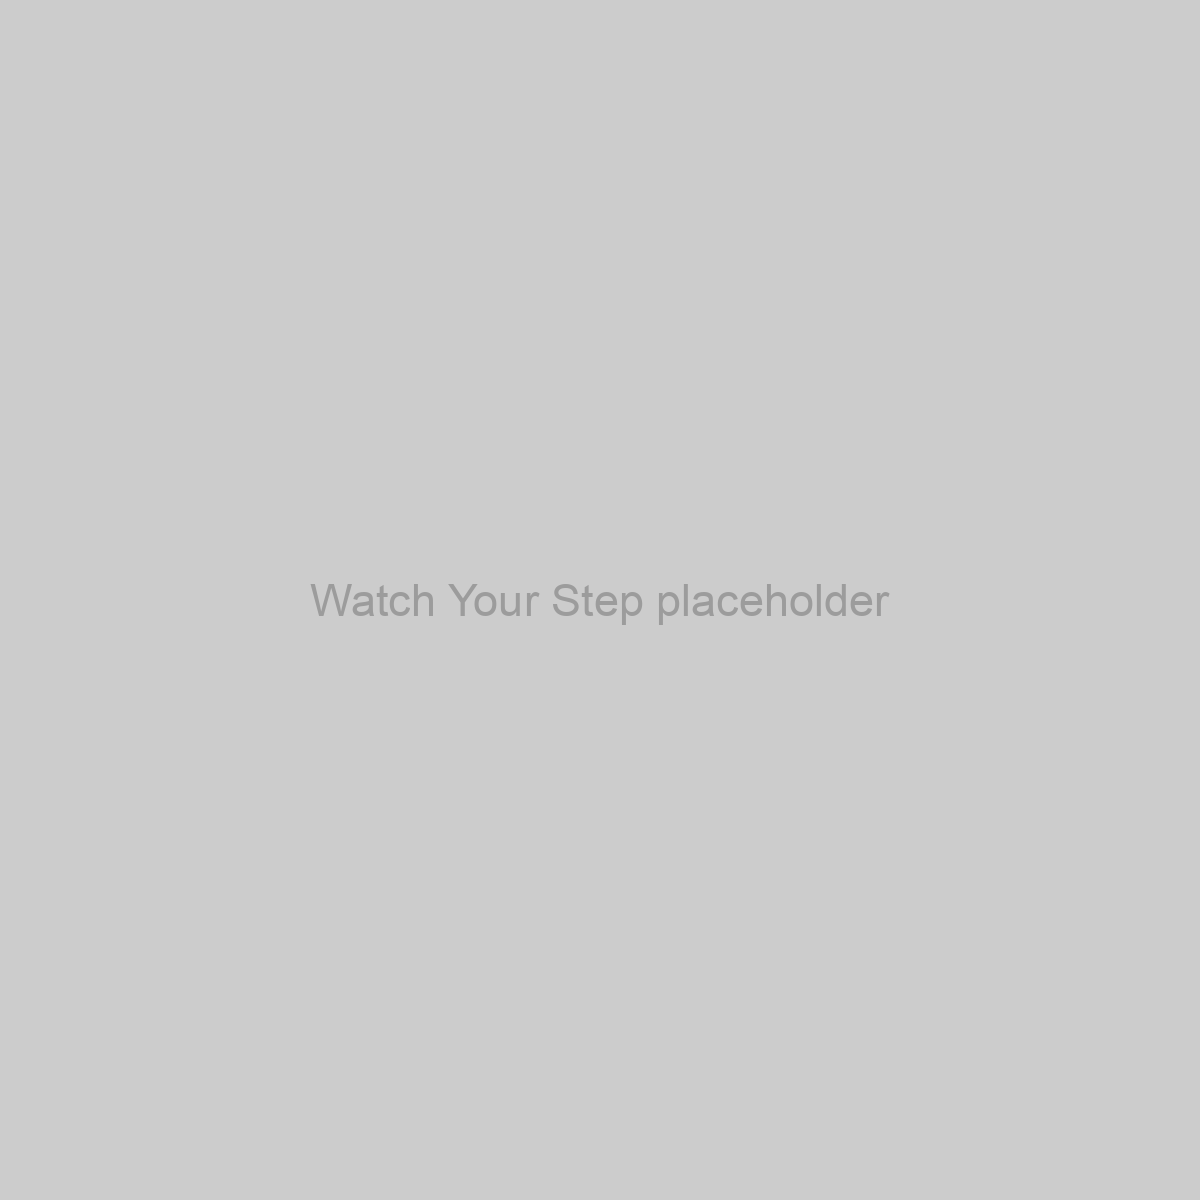 Watch Your Step Placeholder Image